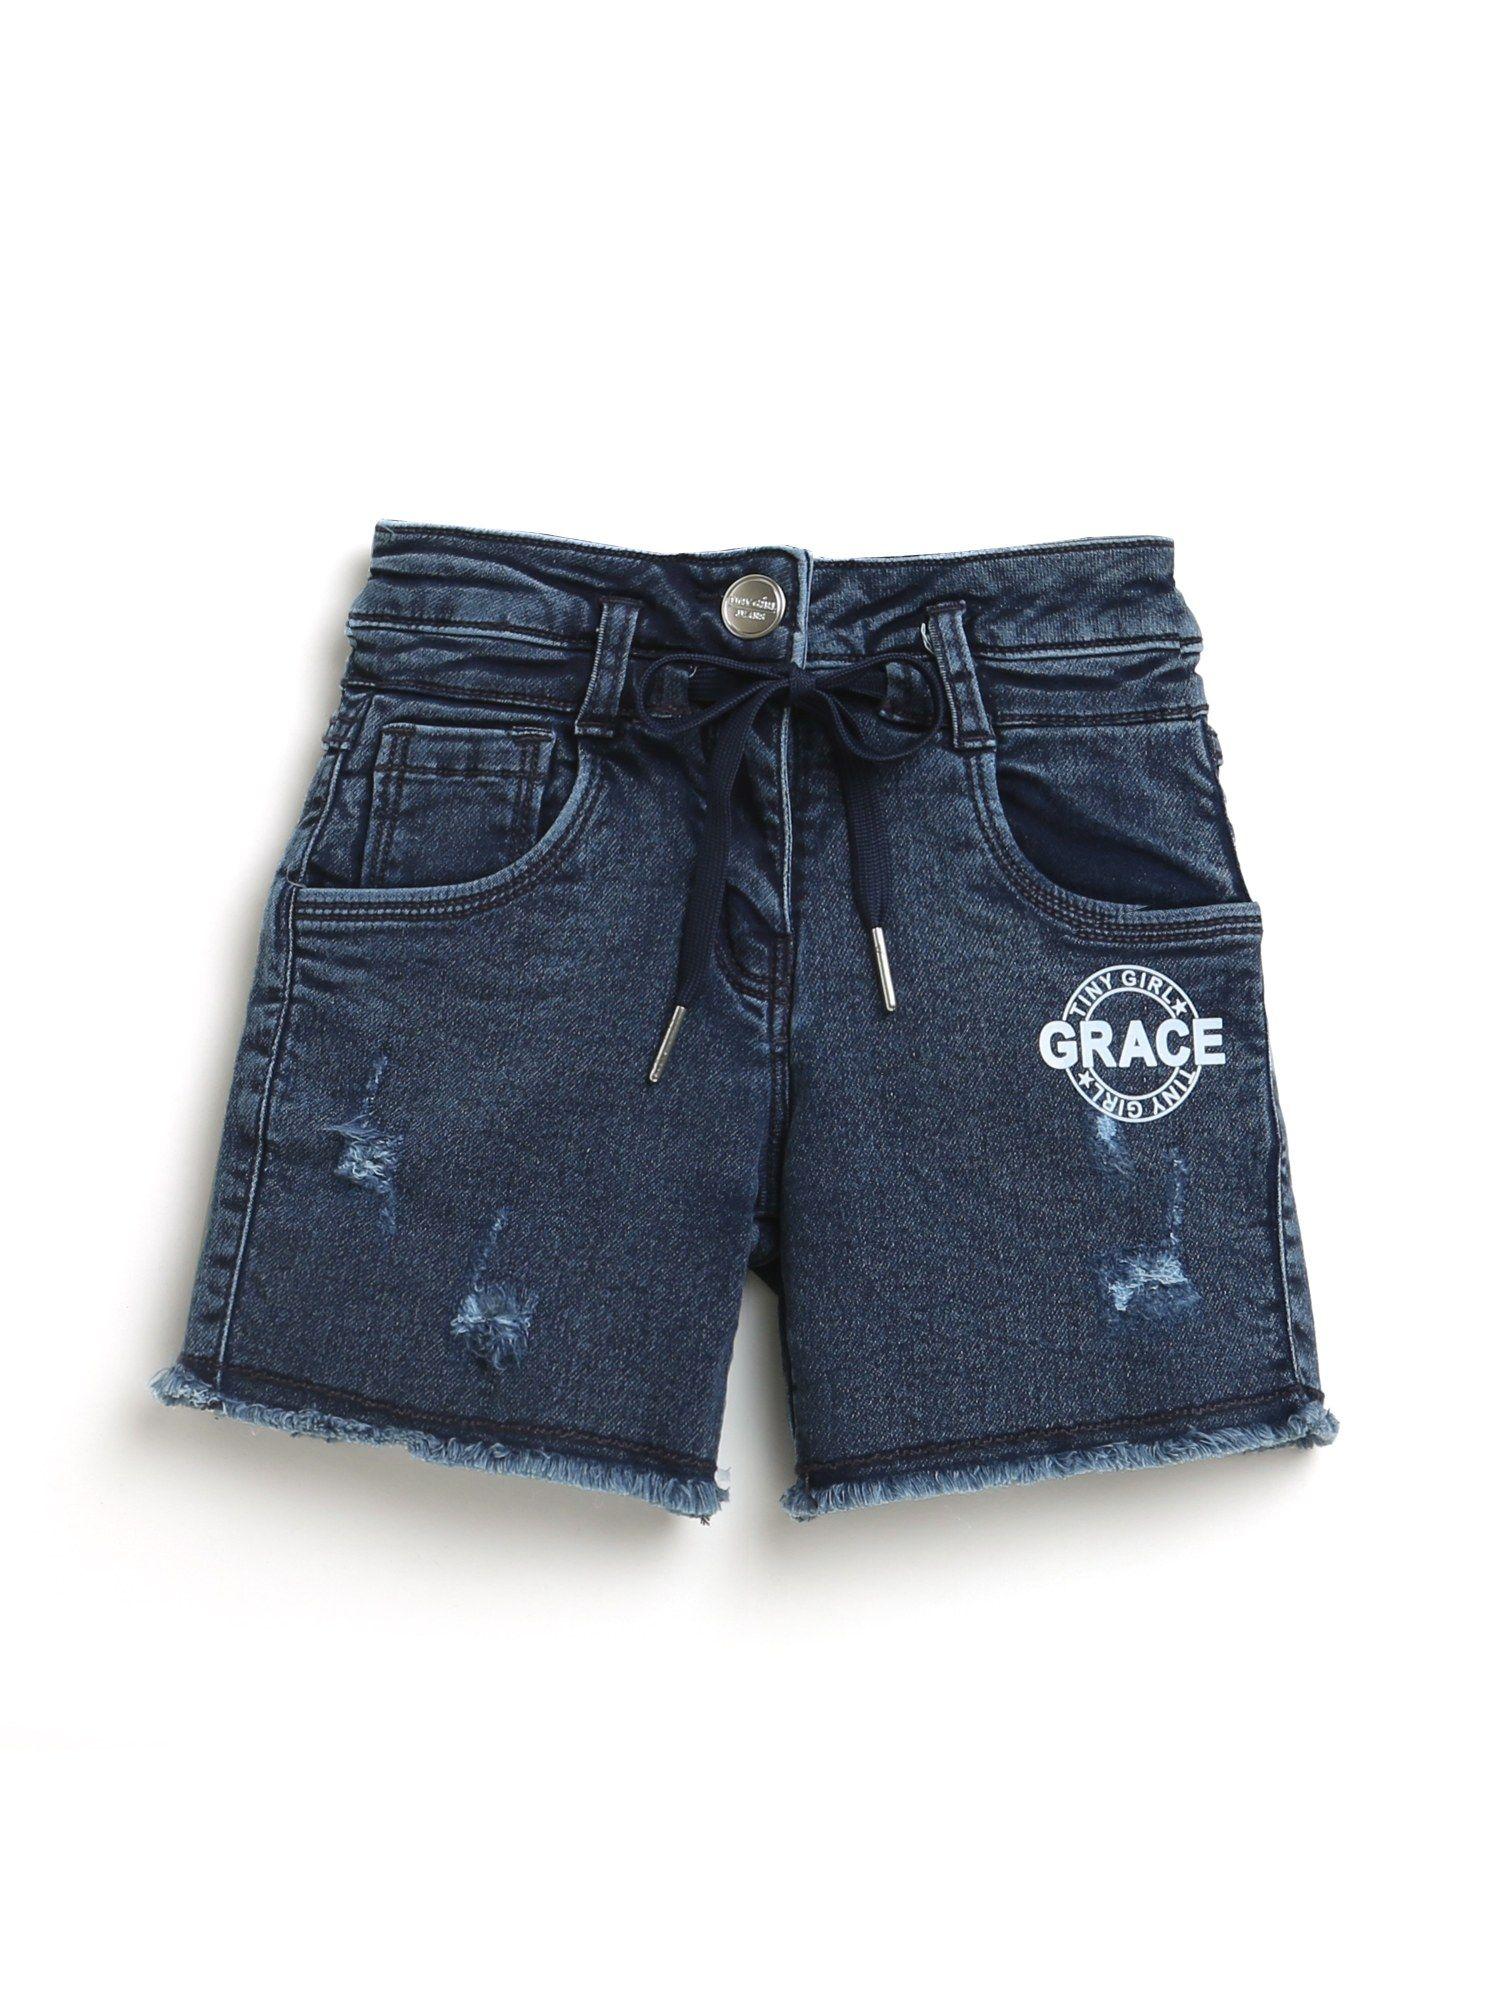 blue placement printed and distressed shorts